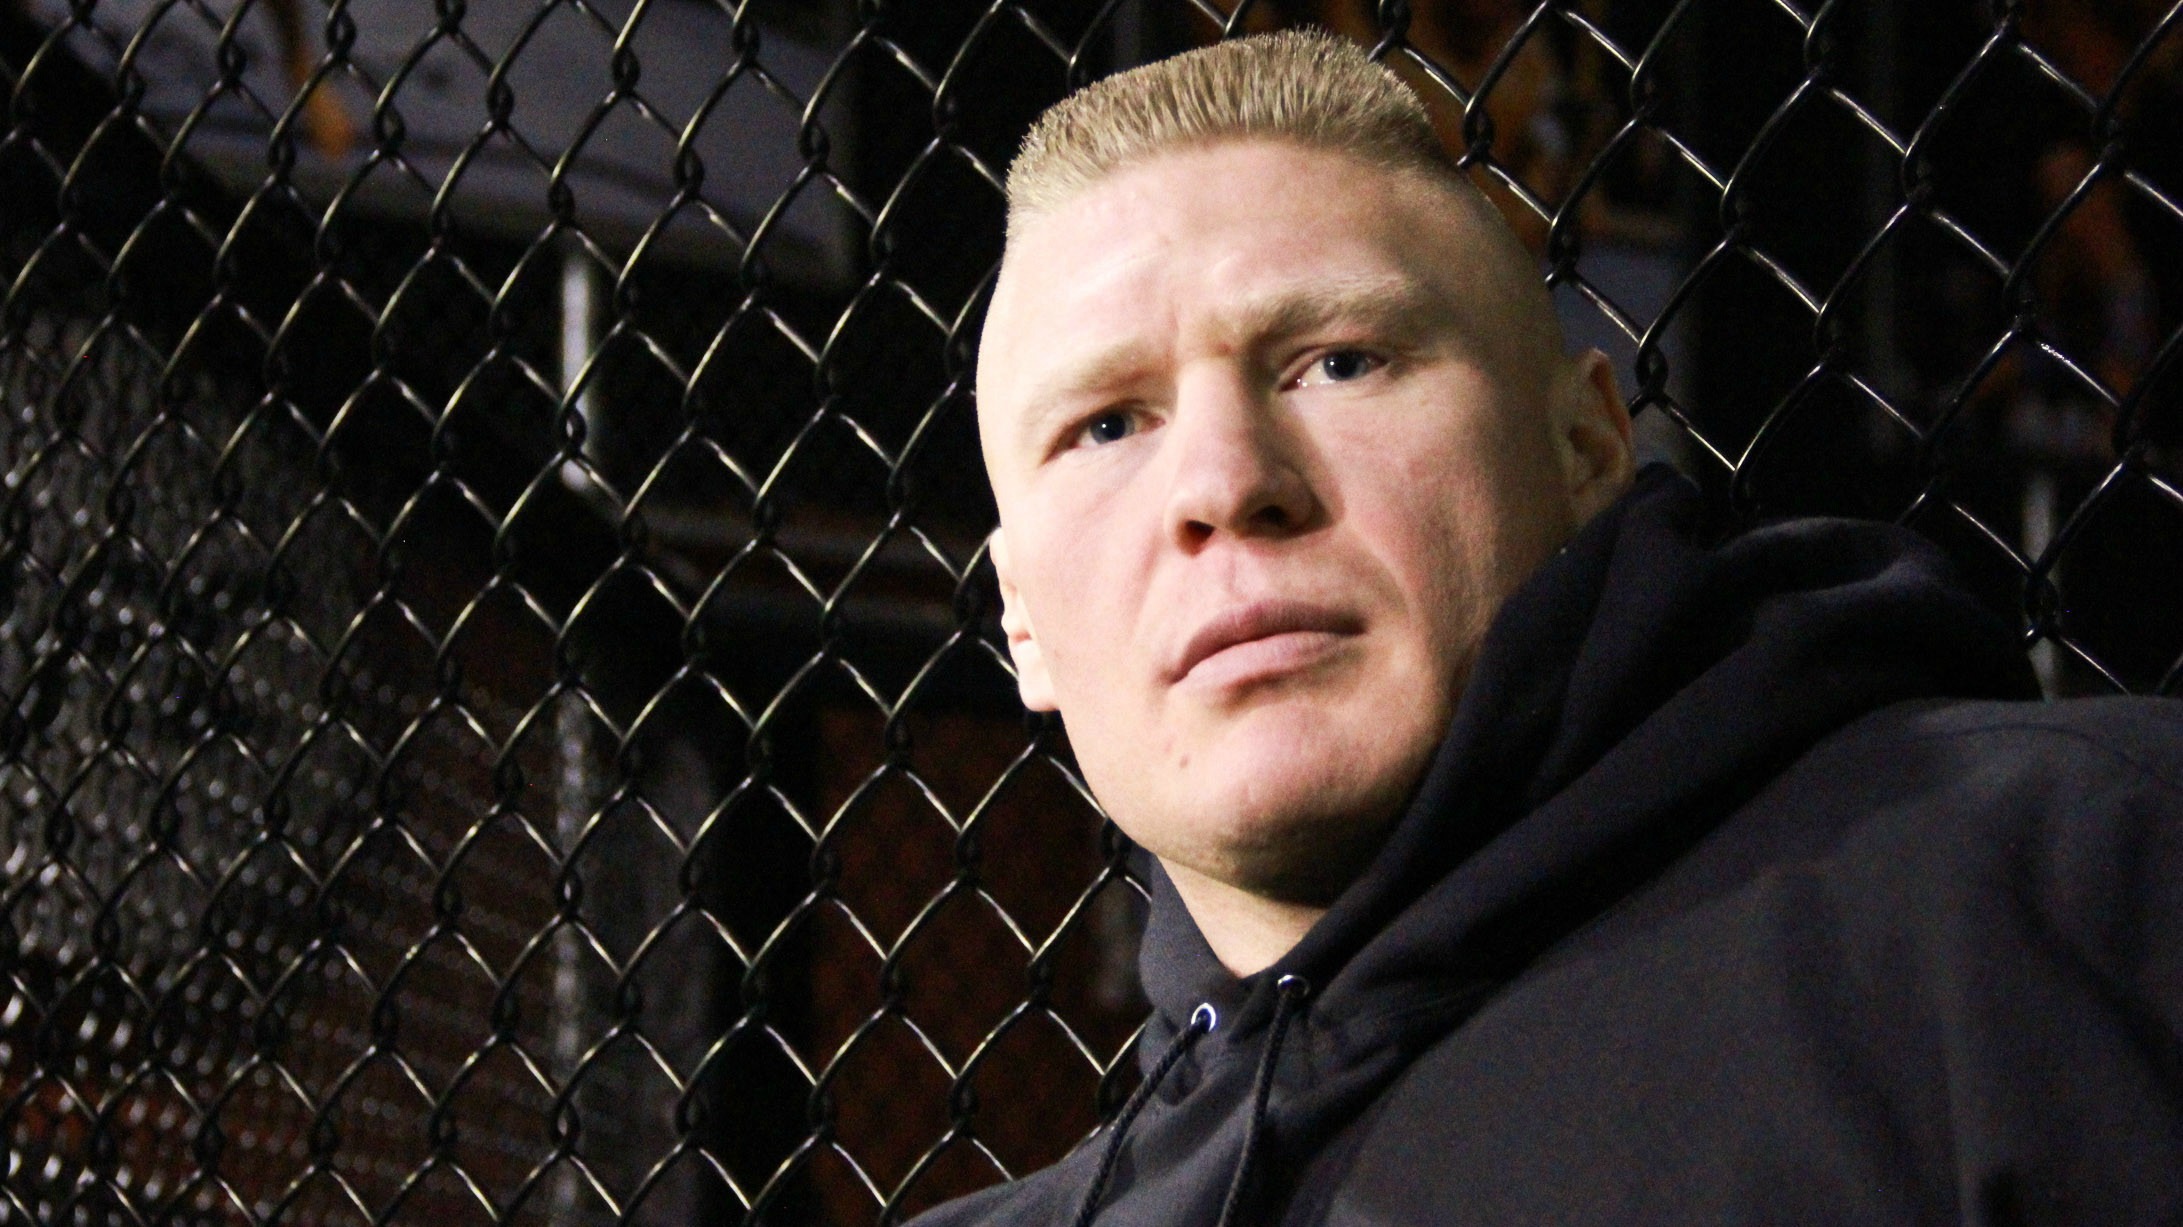 Brock Lesnar Wallpaper Image Photos Pictures Background